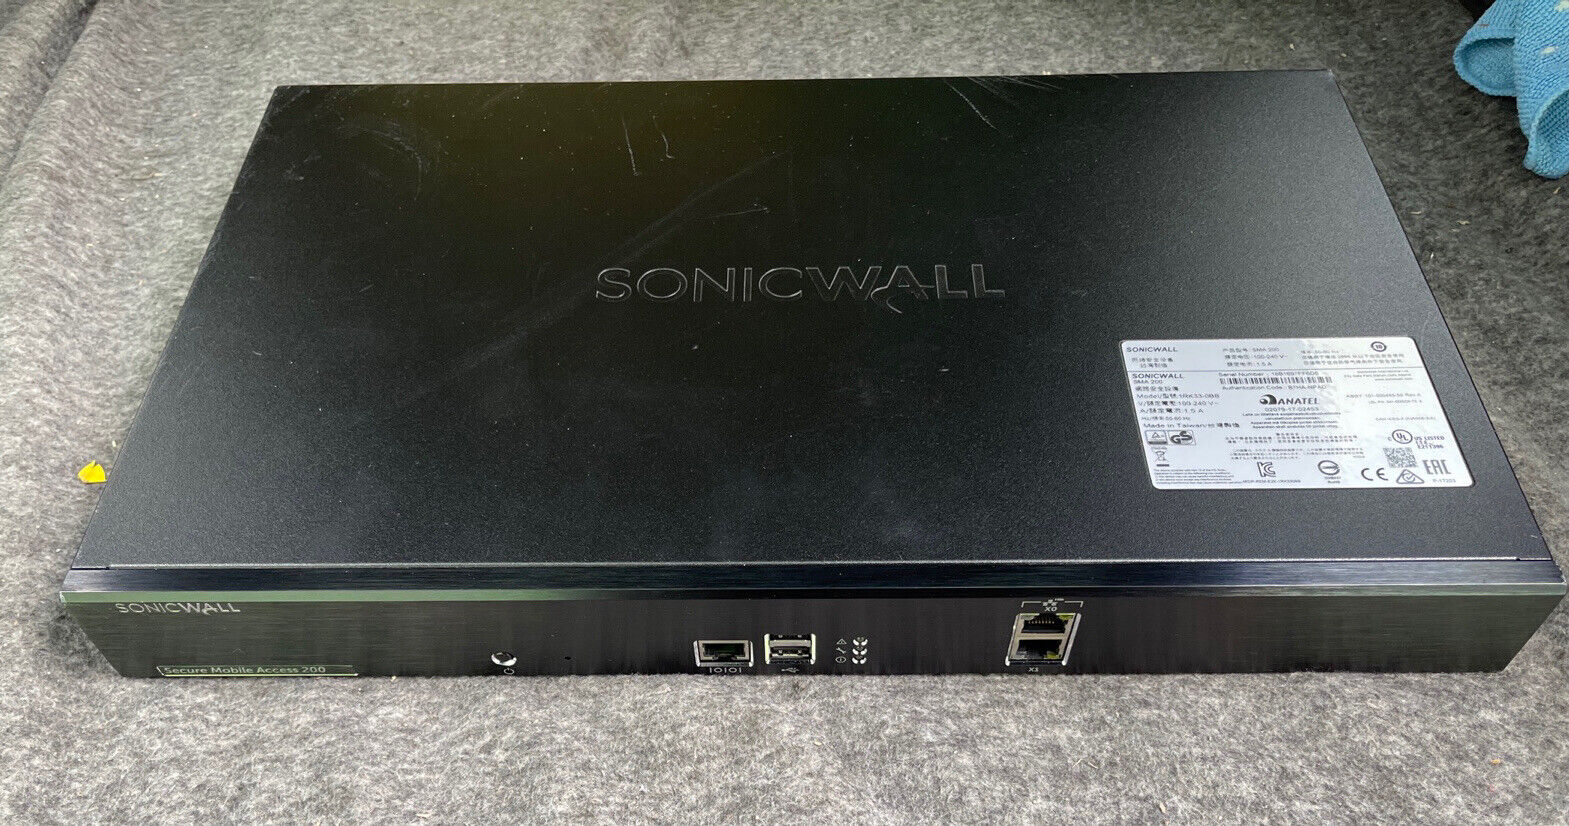 SonicWALL SMA 200 Secure Mobile Access